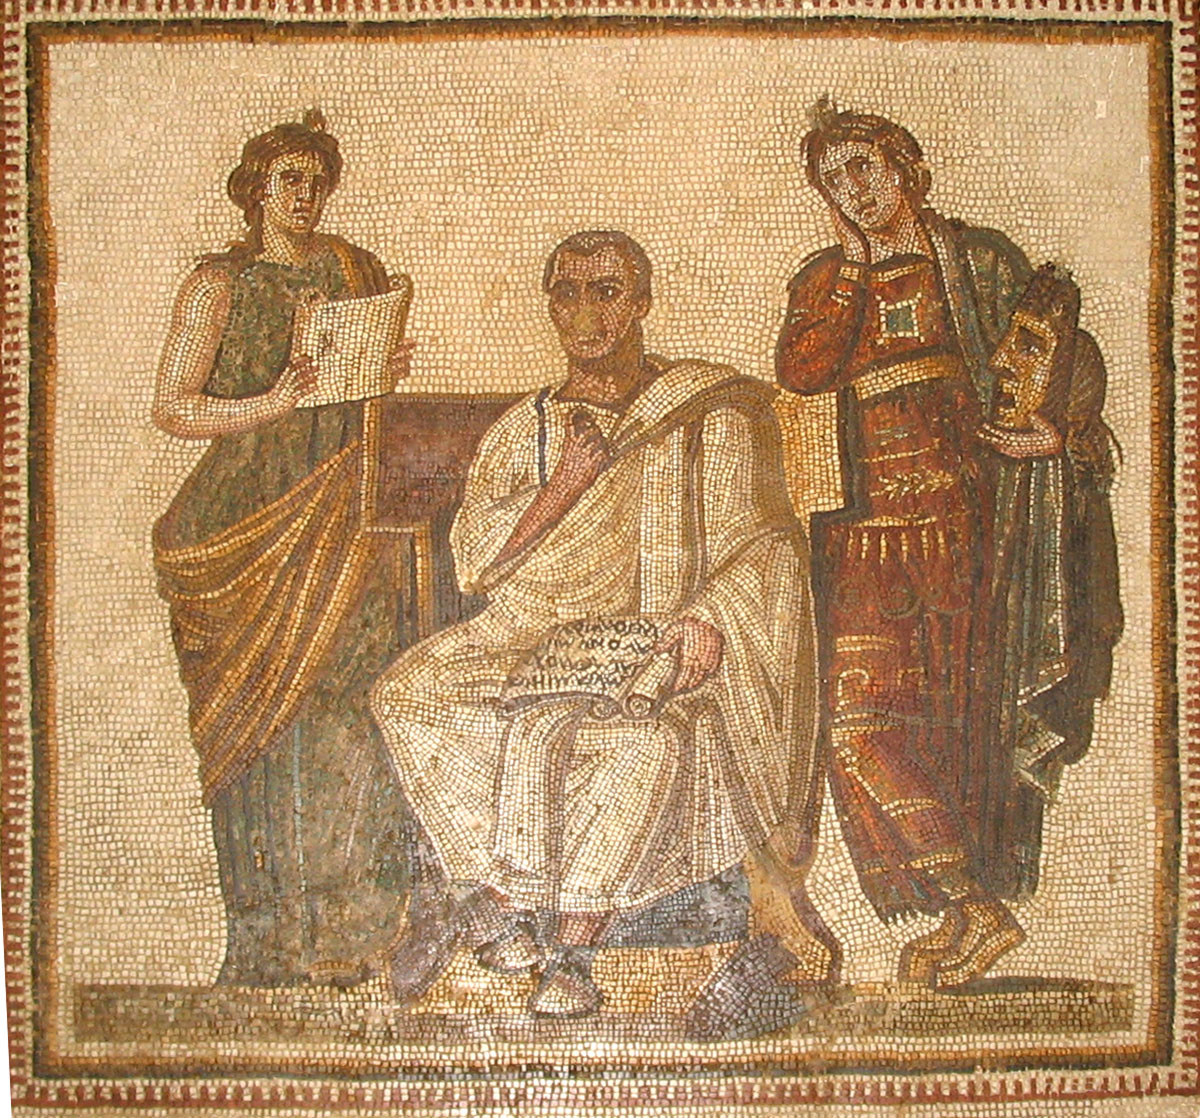 A third-century Tunisian mosaic depicts Vergil seated between muses Clio and Melpomene. (Bardo National Museum/Wikimedia Commons)